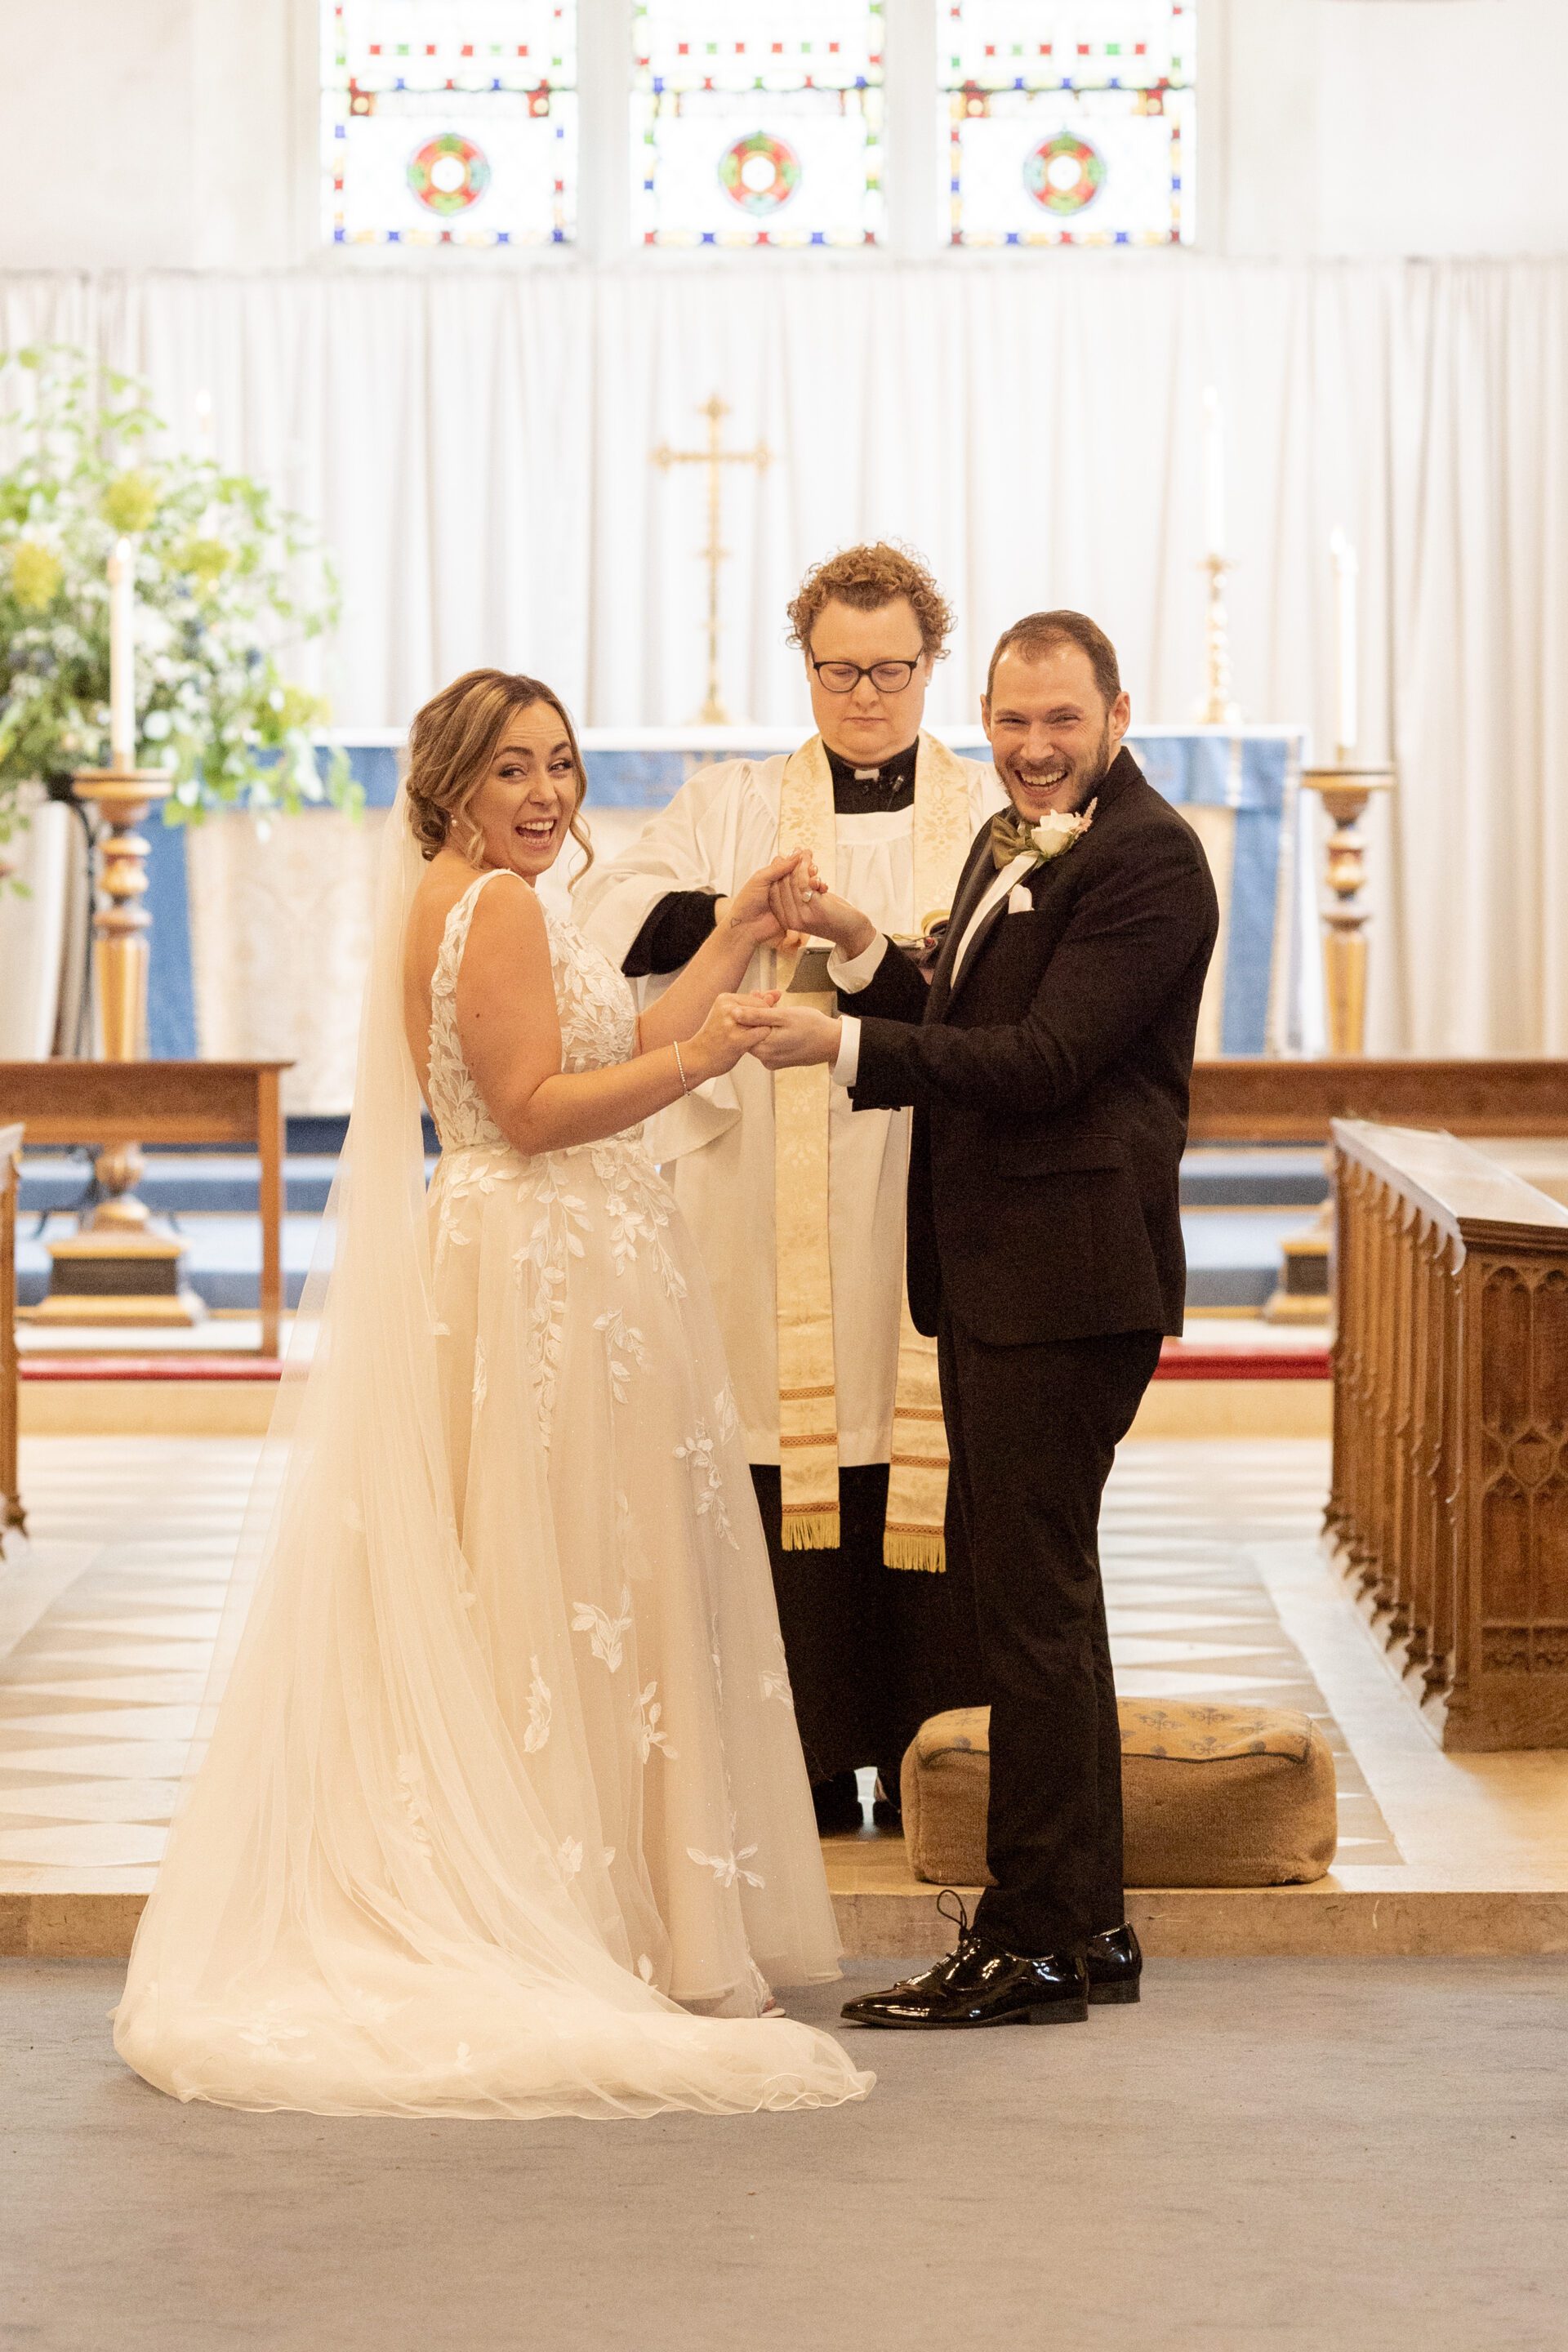 The bride and groom celebrate during their church wedding